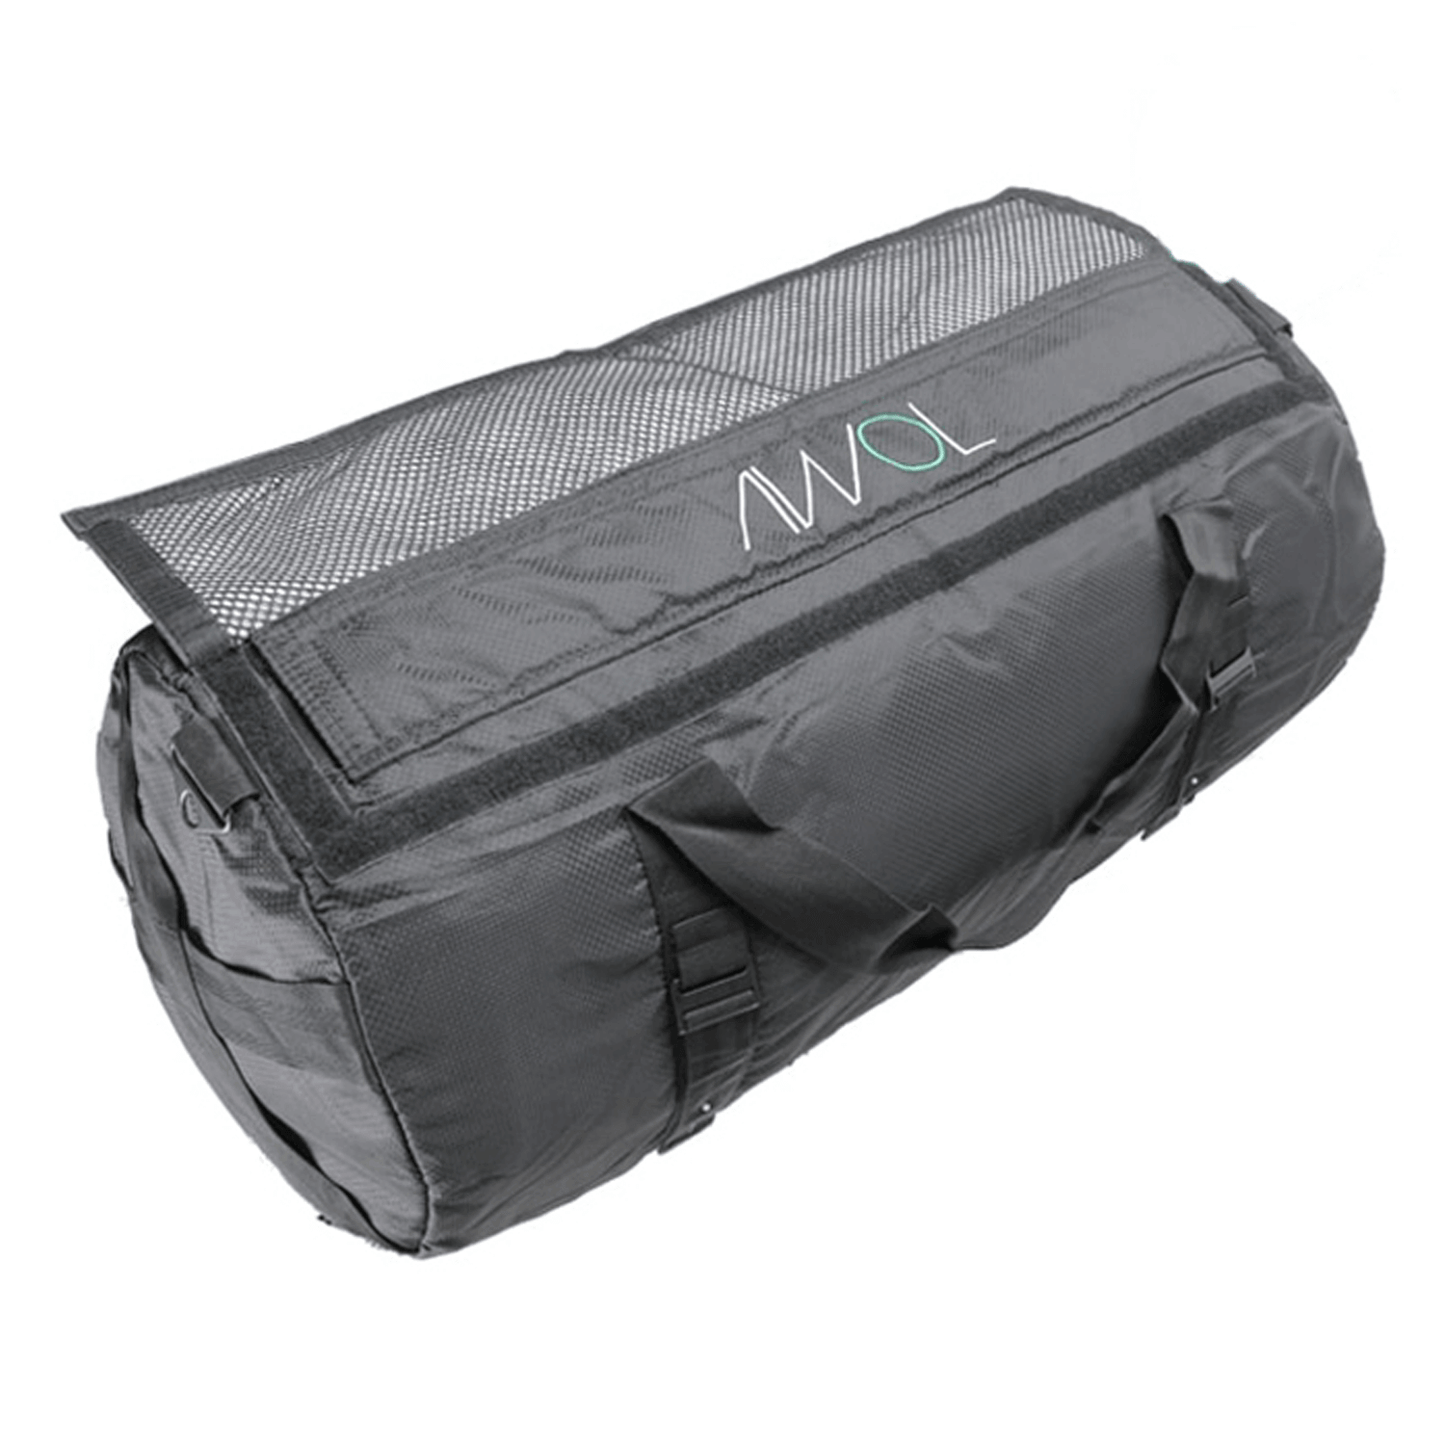 AWOL DAILY XX-Large Ripstop Black Duffle Bag 886132 Harvest & Extraction 859097007214